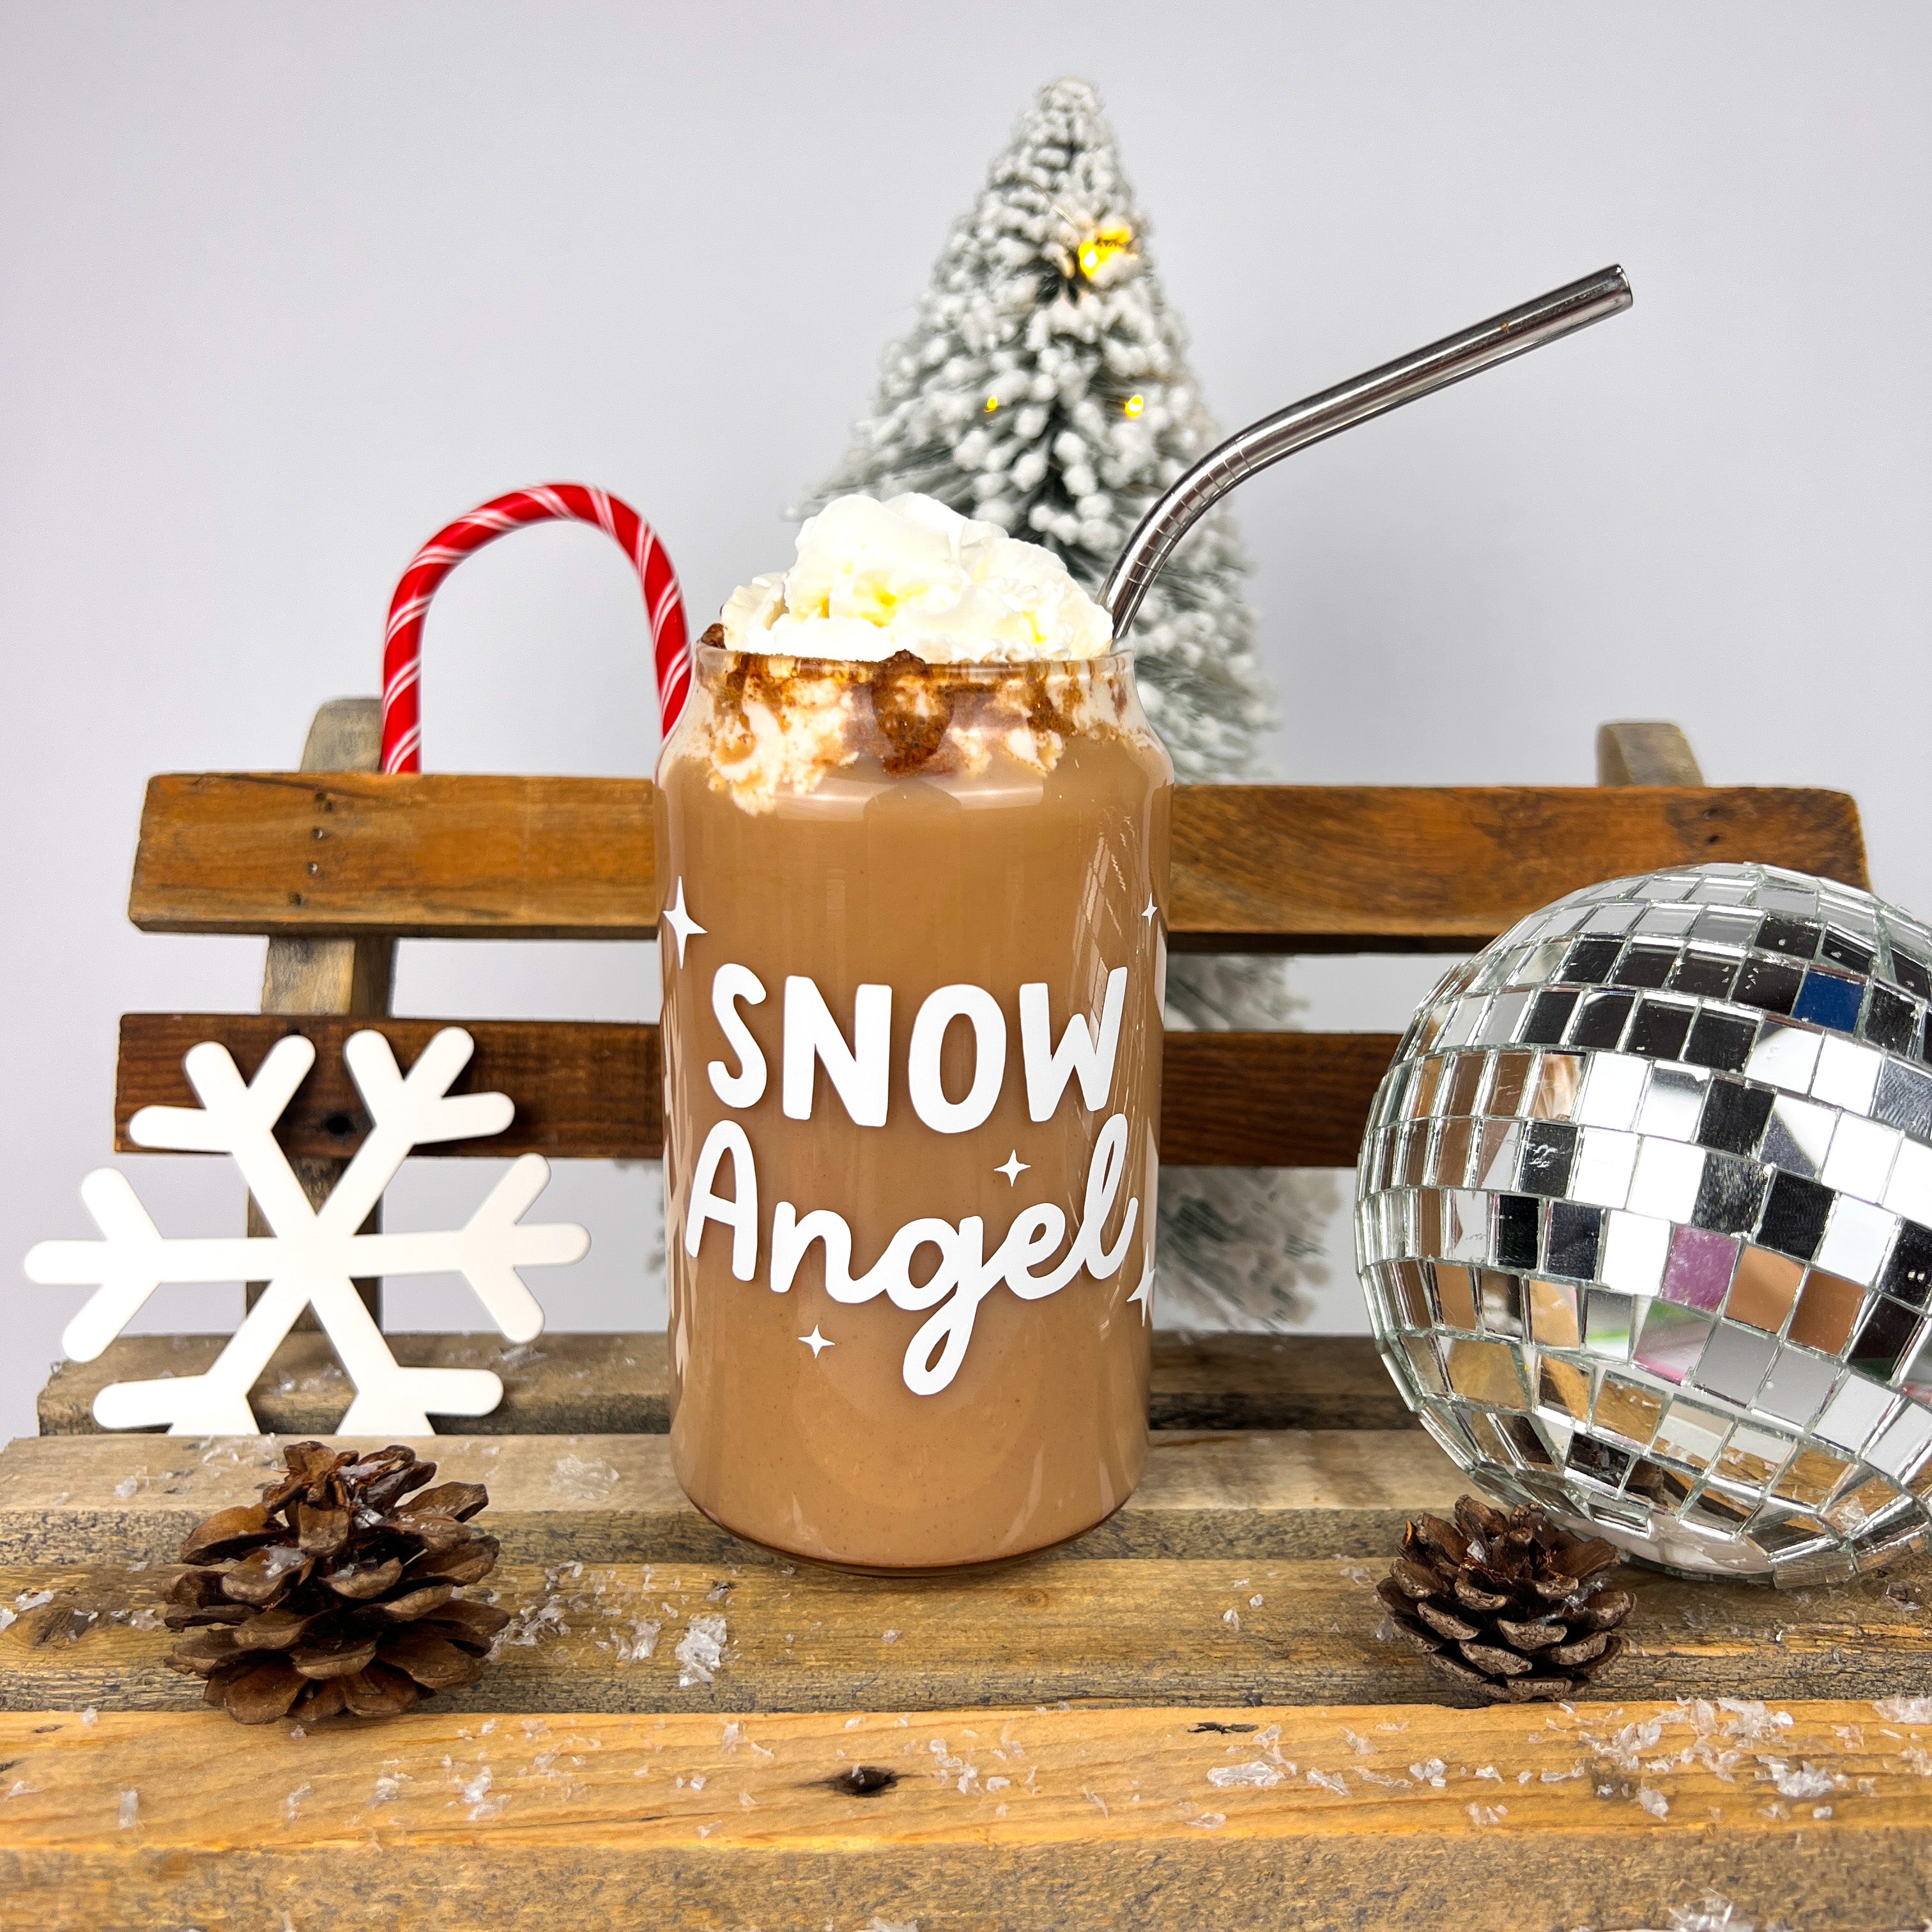 Snow angel glass can